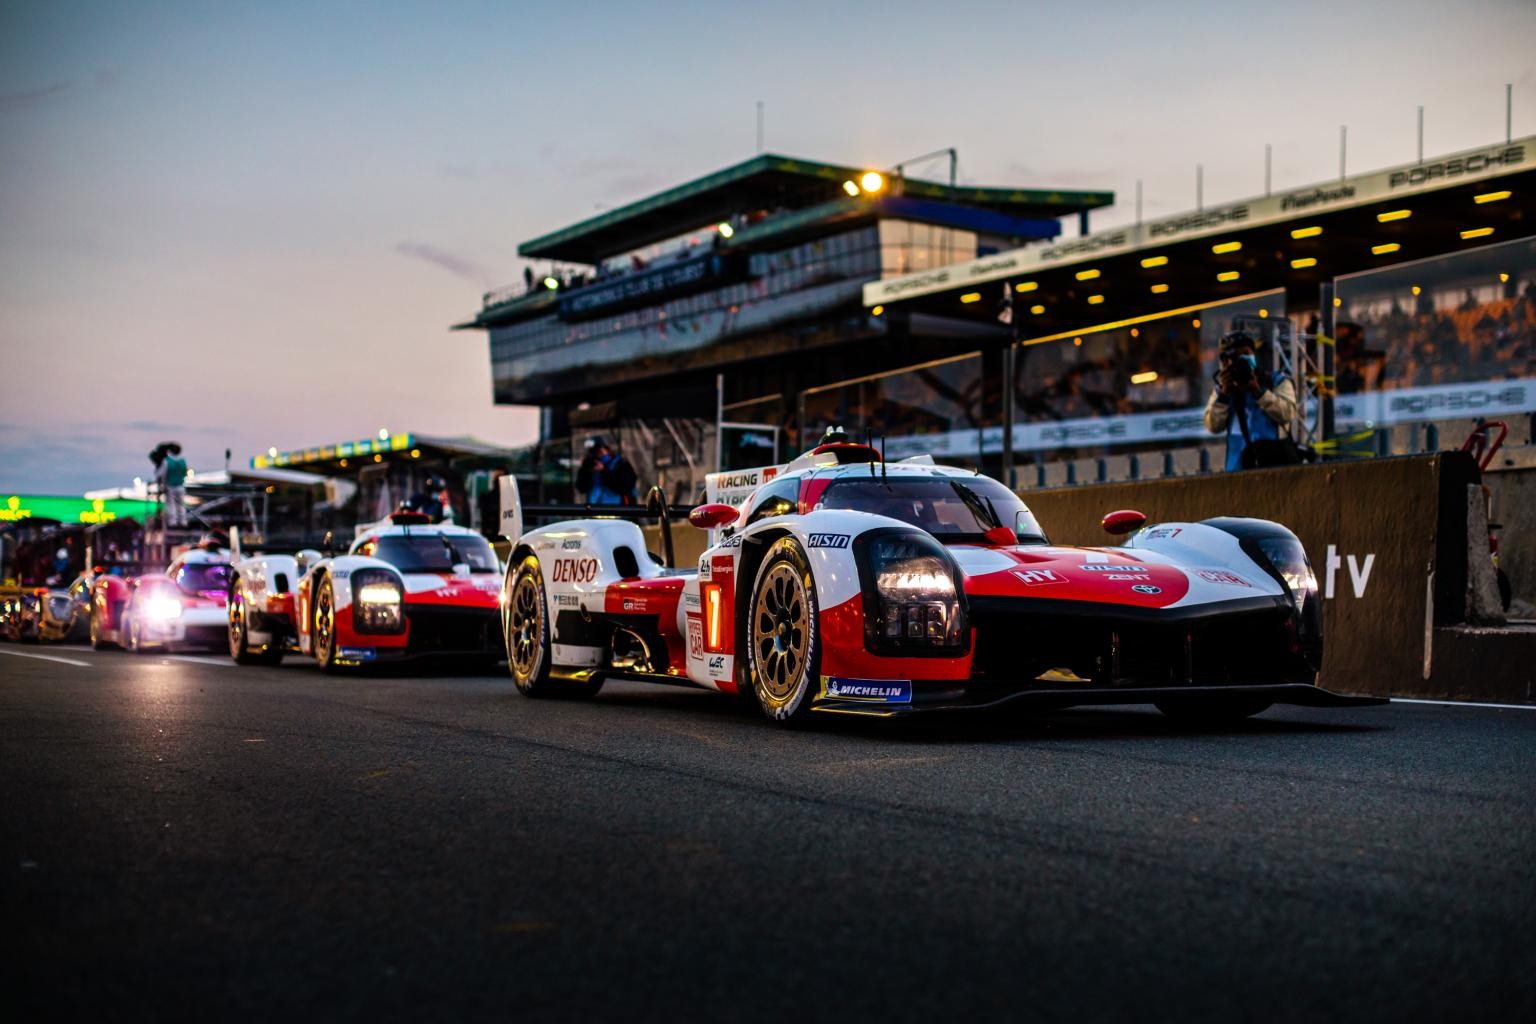 Racecars lined up at the 24 Hours of Le Mans